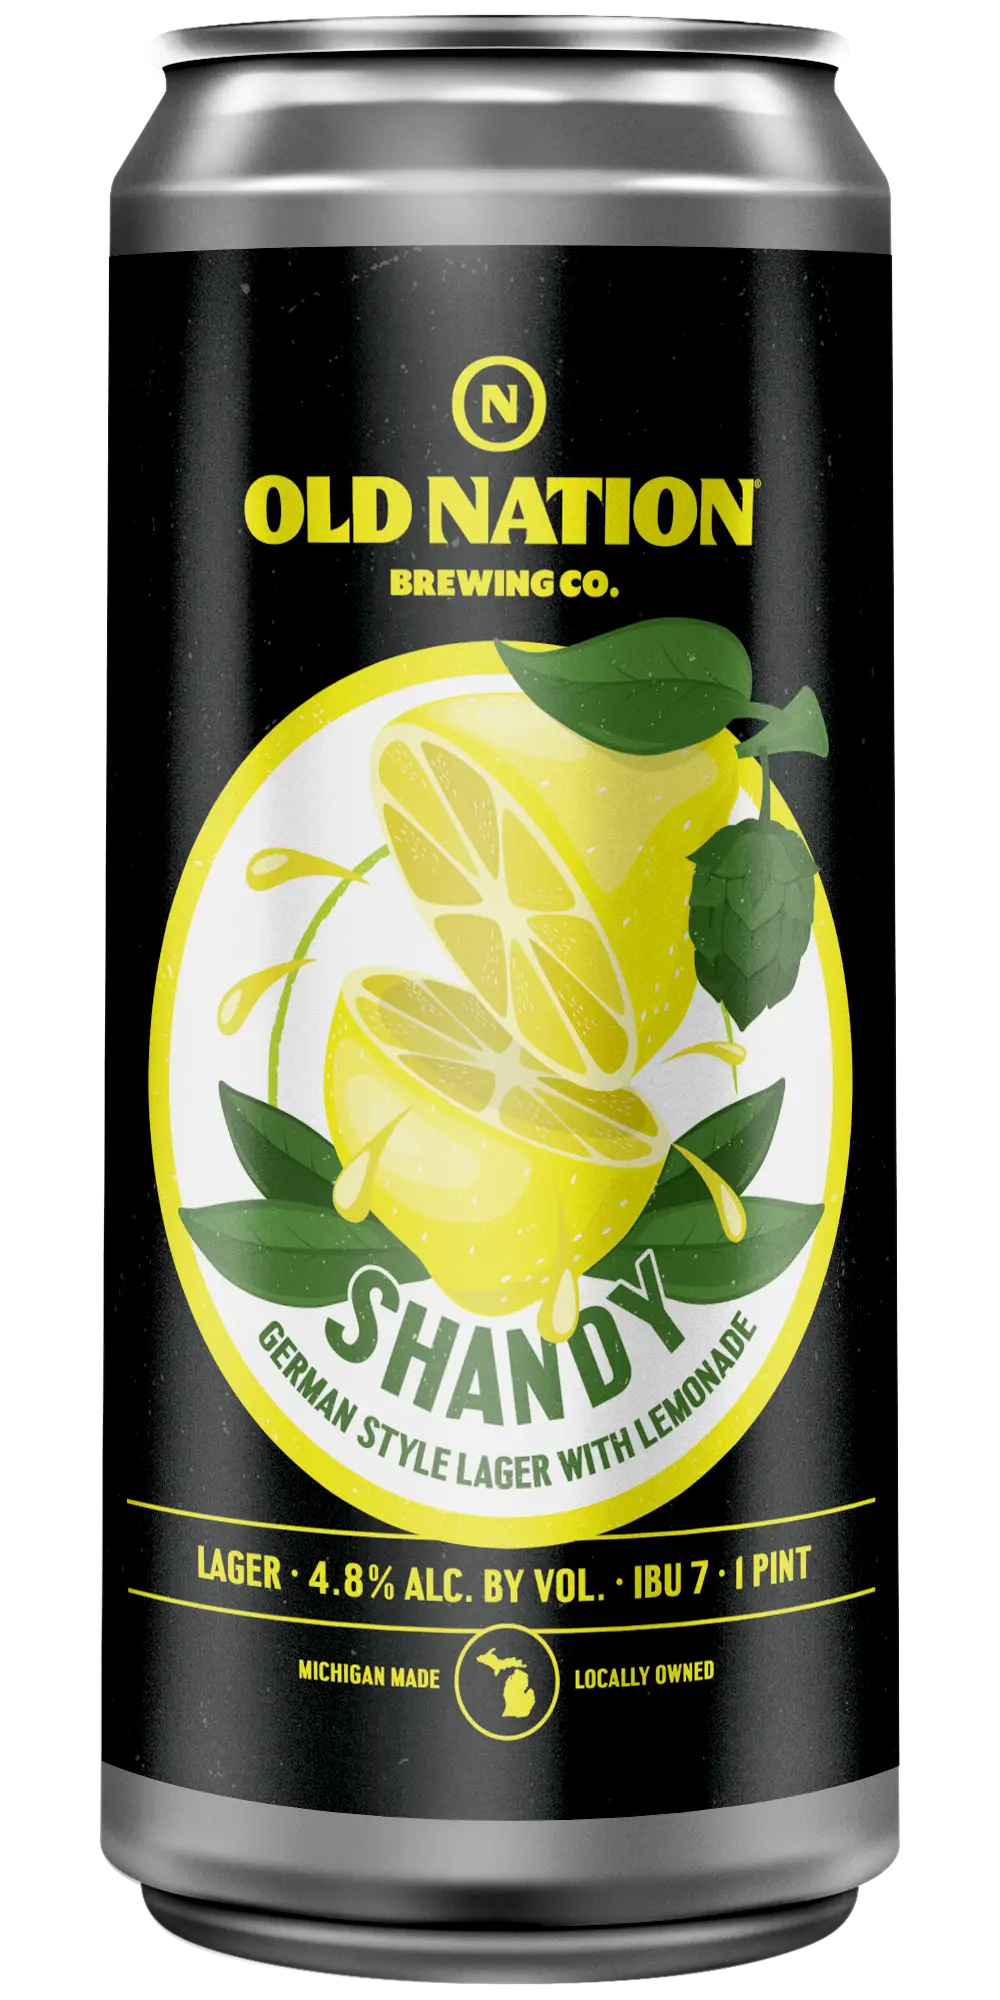 Old Nation Shandy beer in an aluminum can. Drawing of a lemon cur in half on the can label.